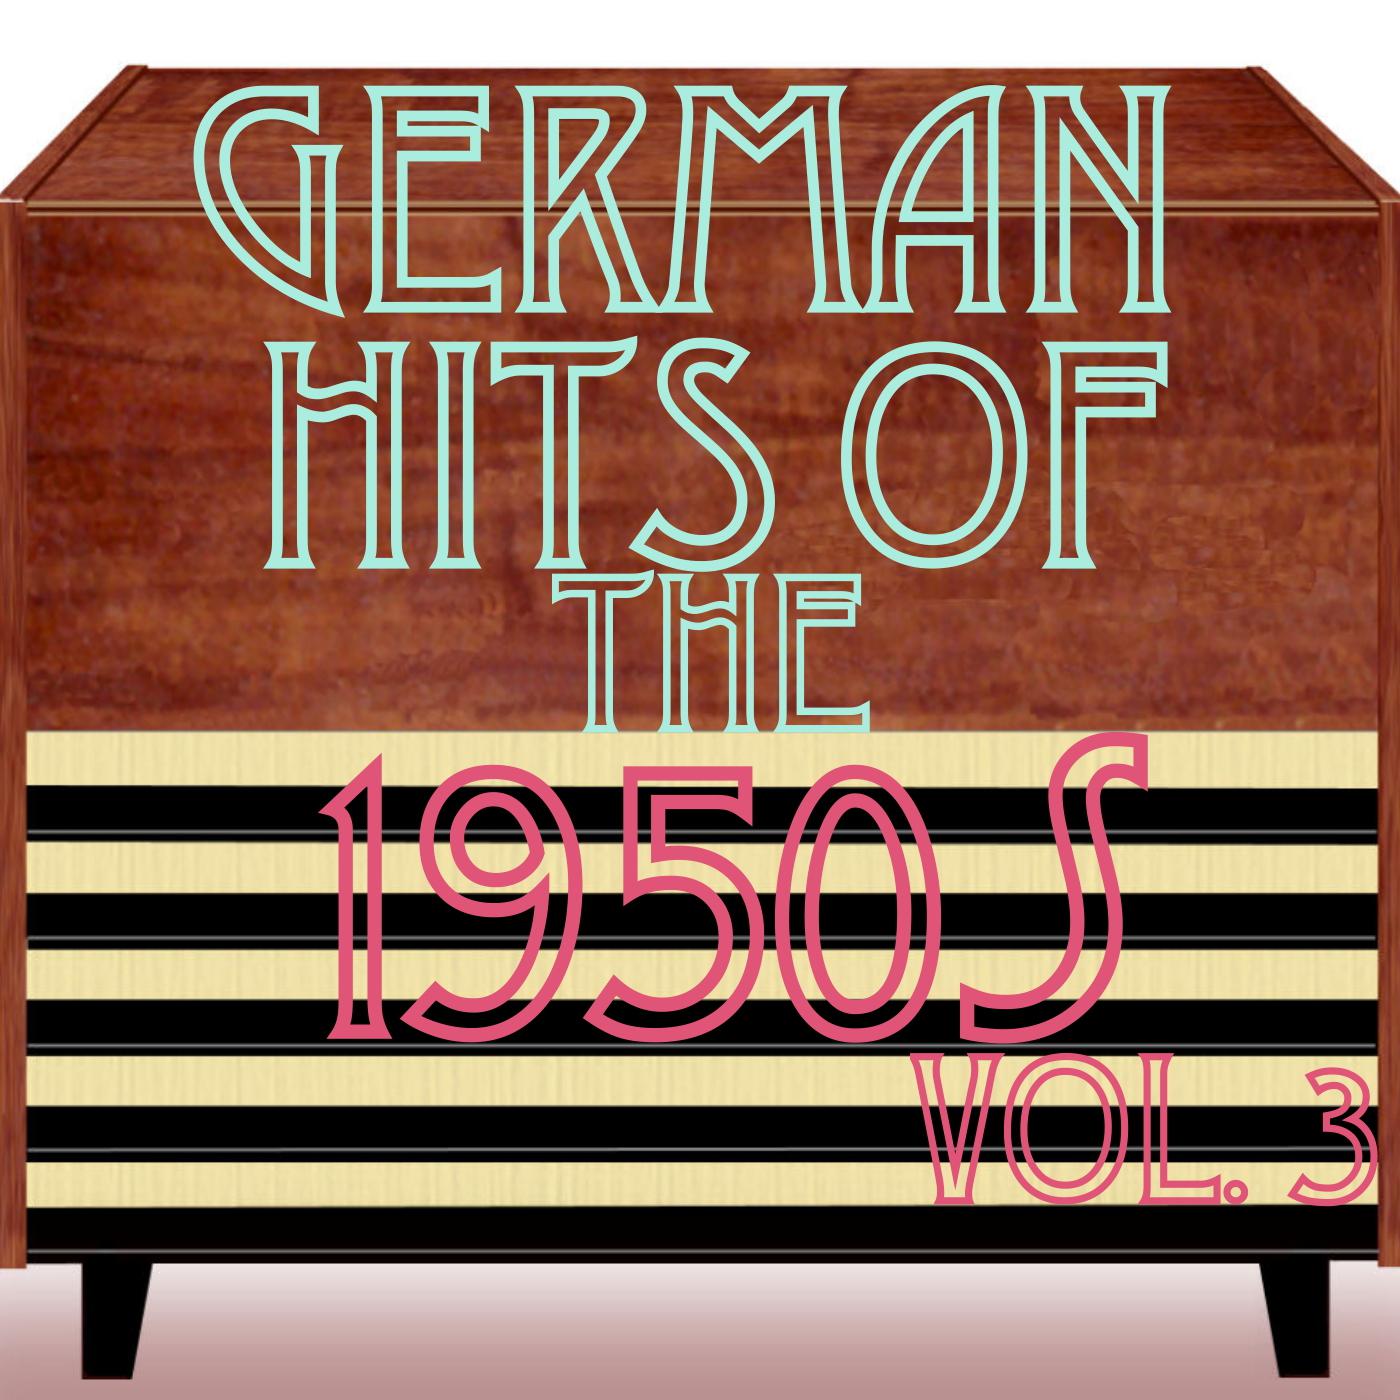 German Hits of the '50s, Vol. 3